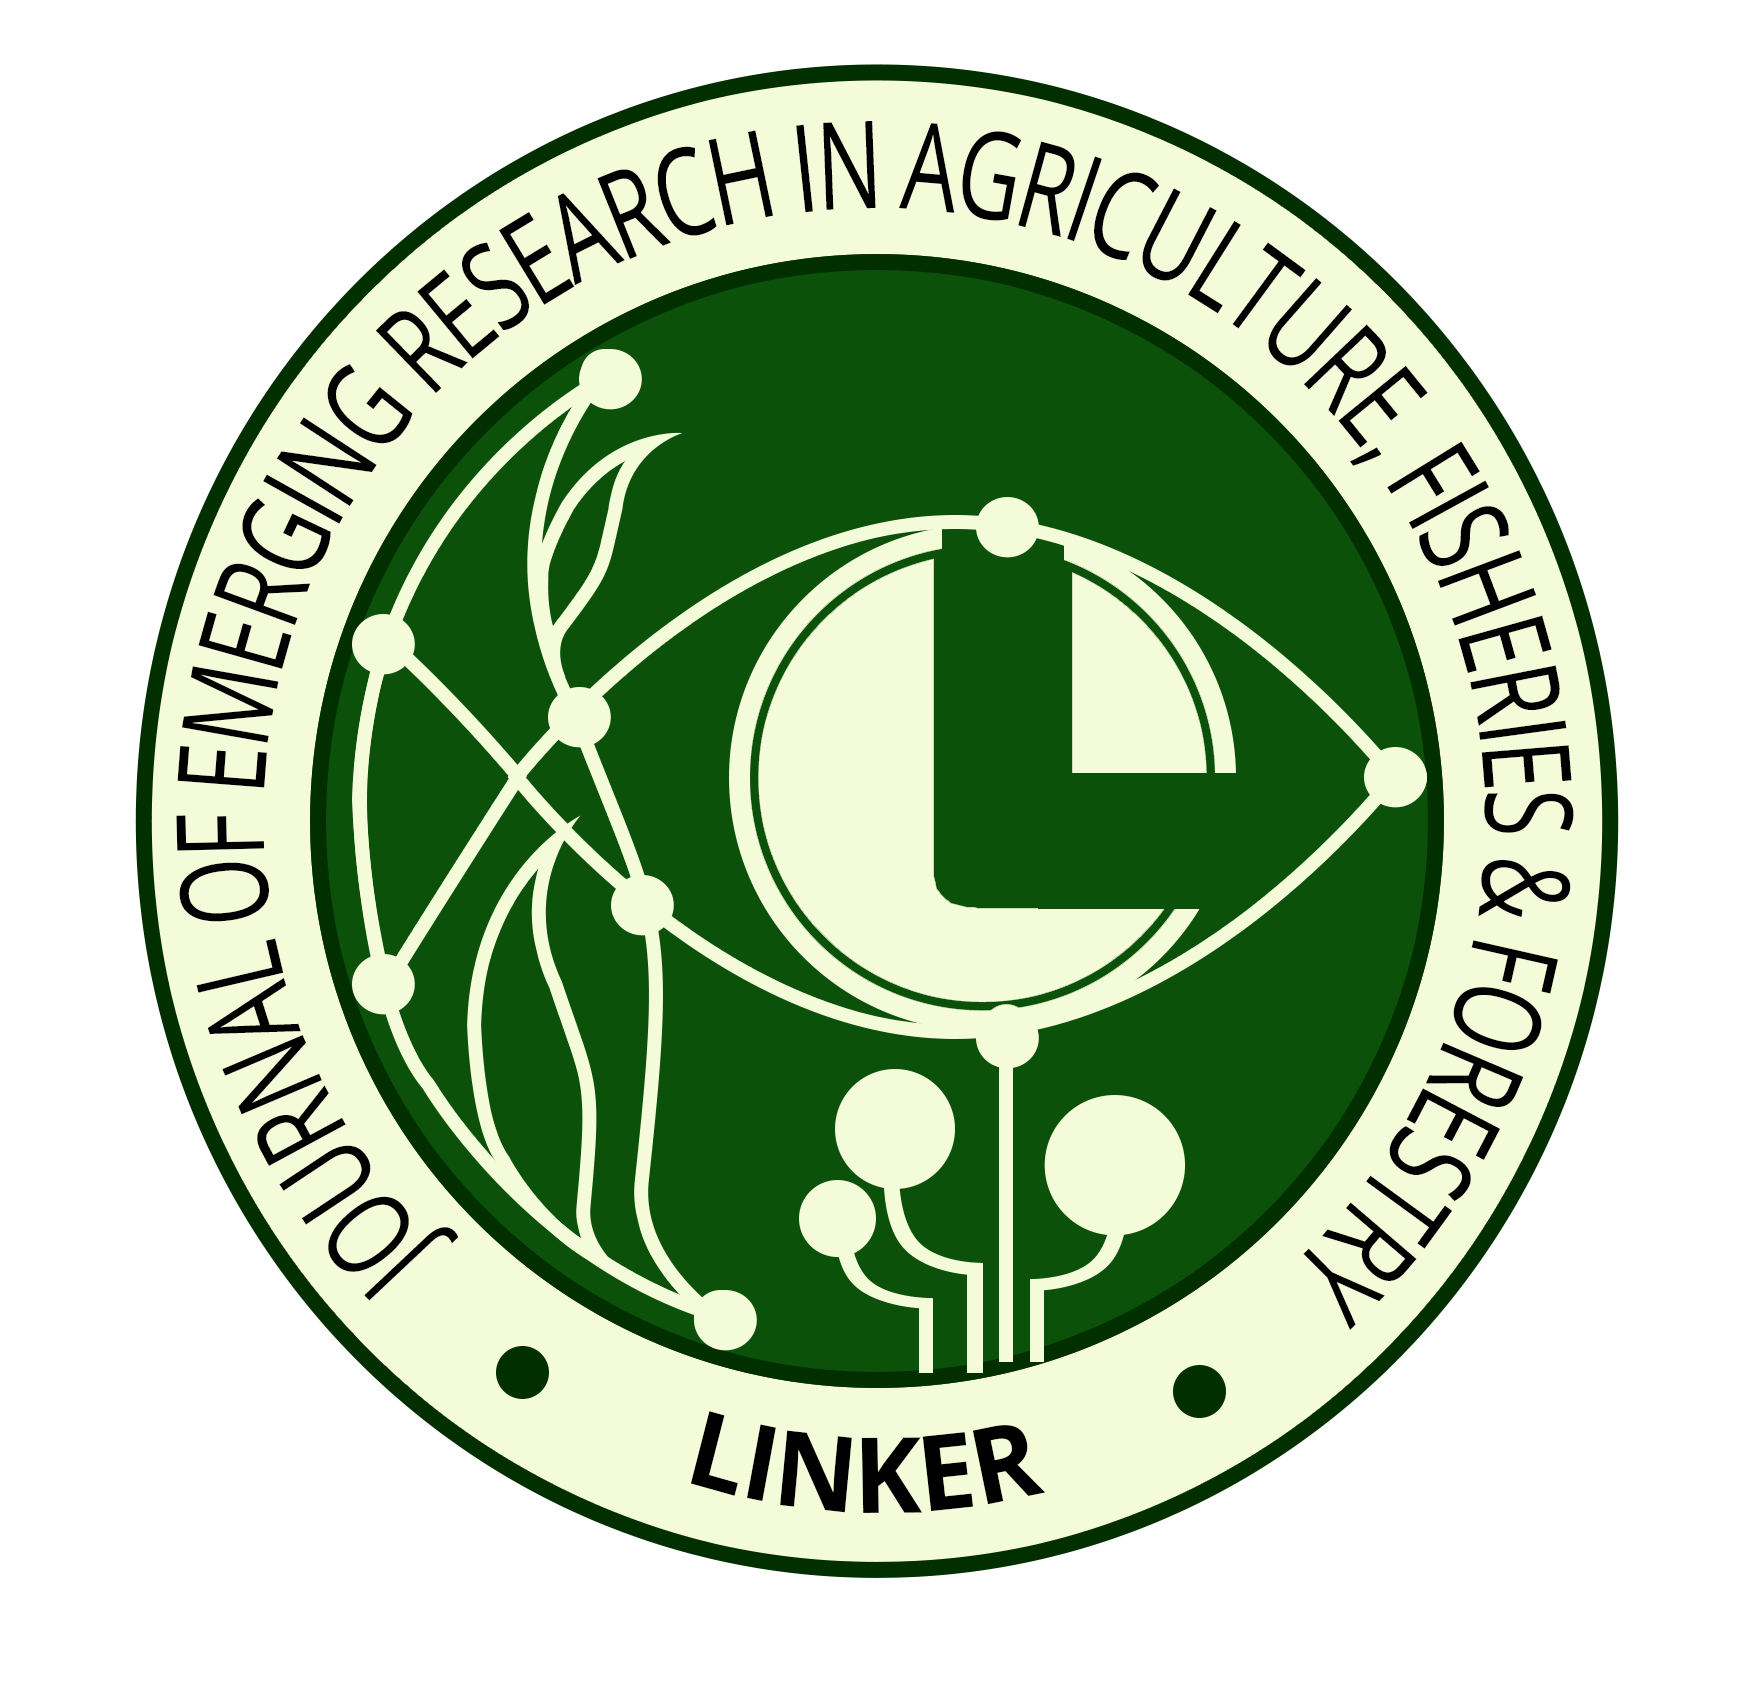 The Journal of Emerging Research in Agriculture, Fisheries and Forestry